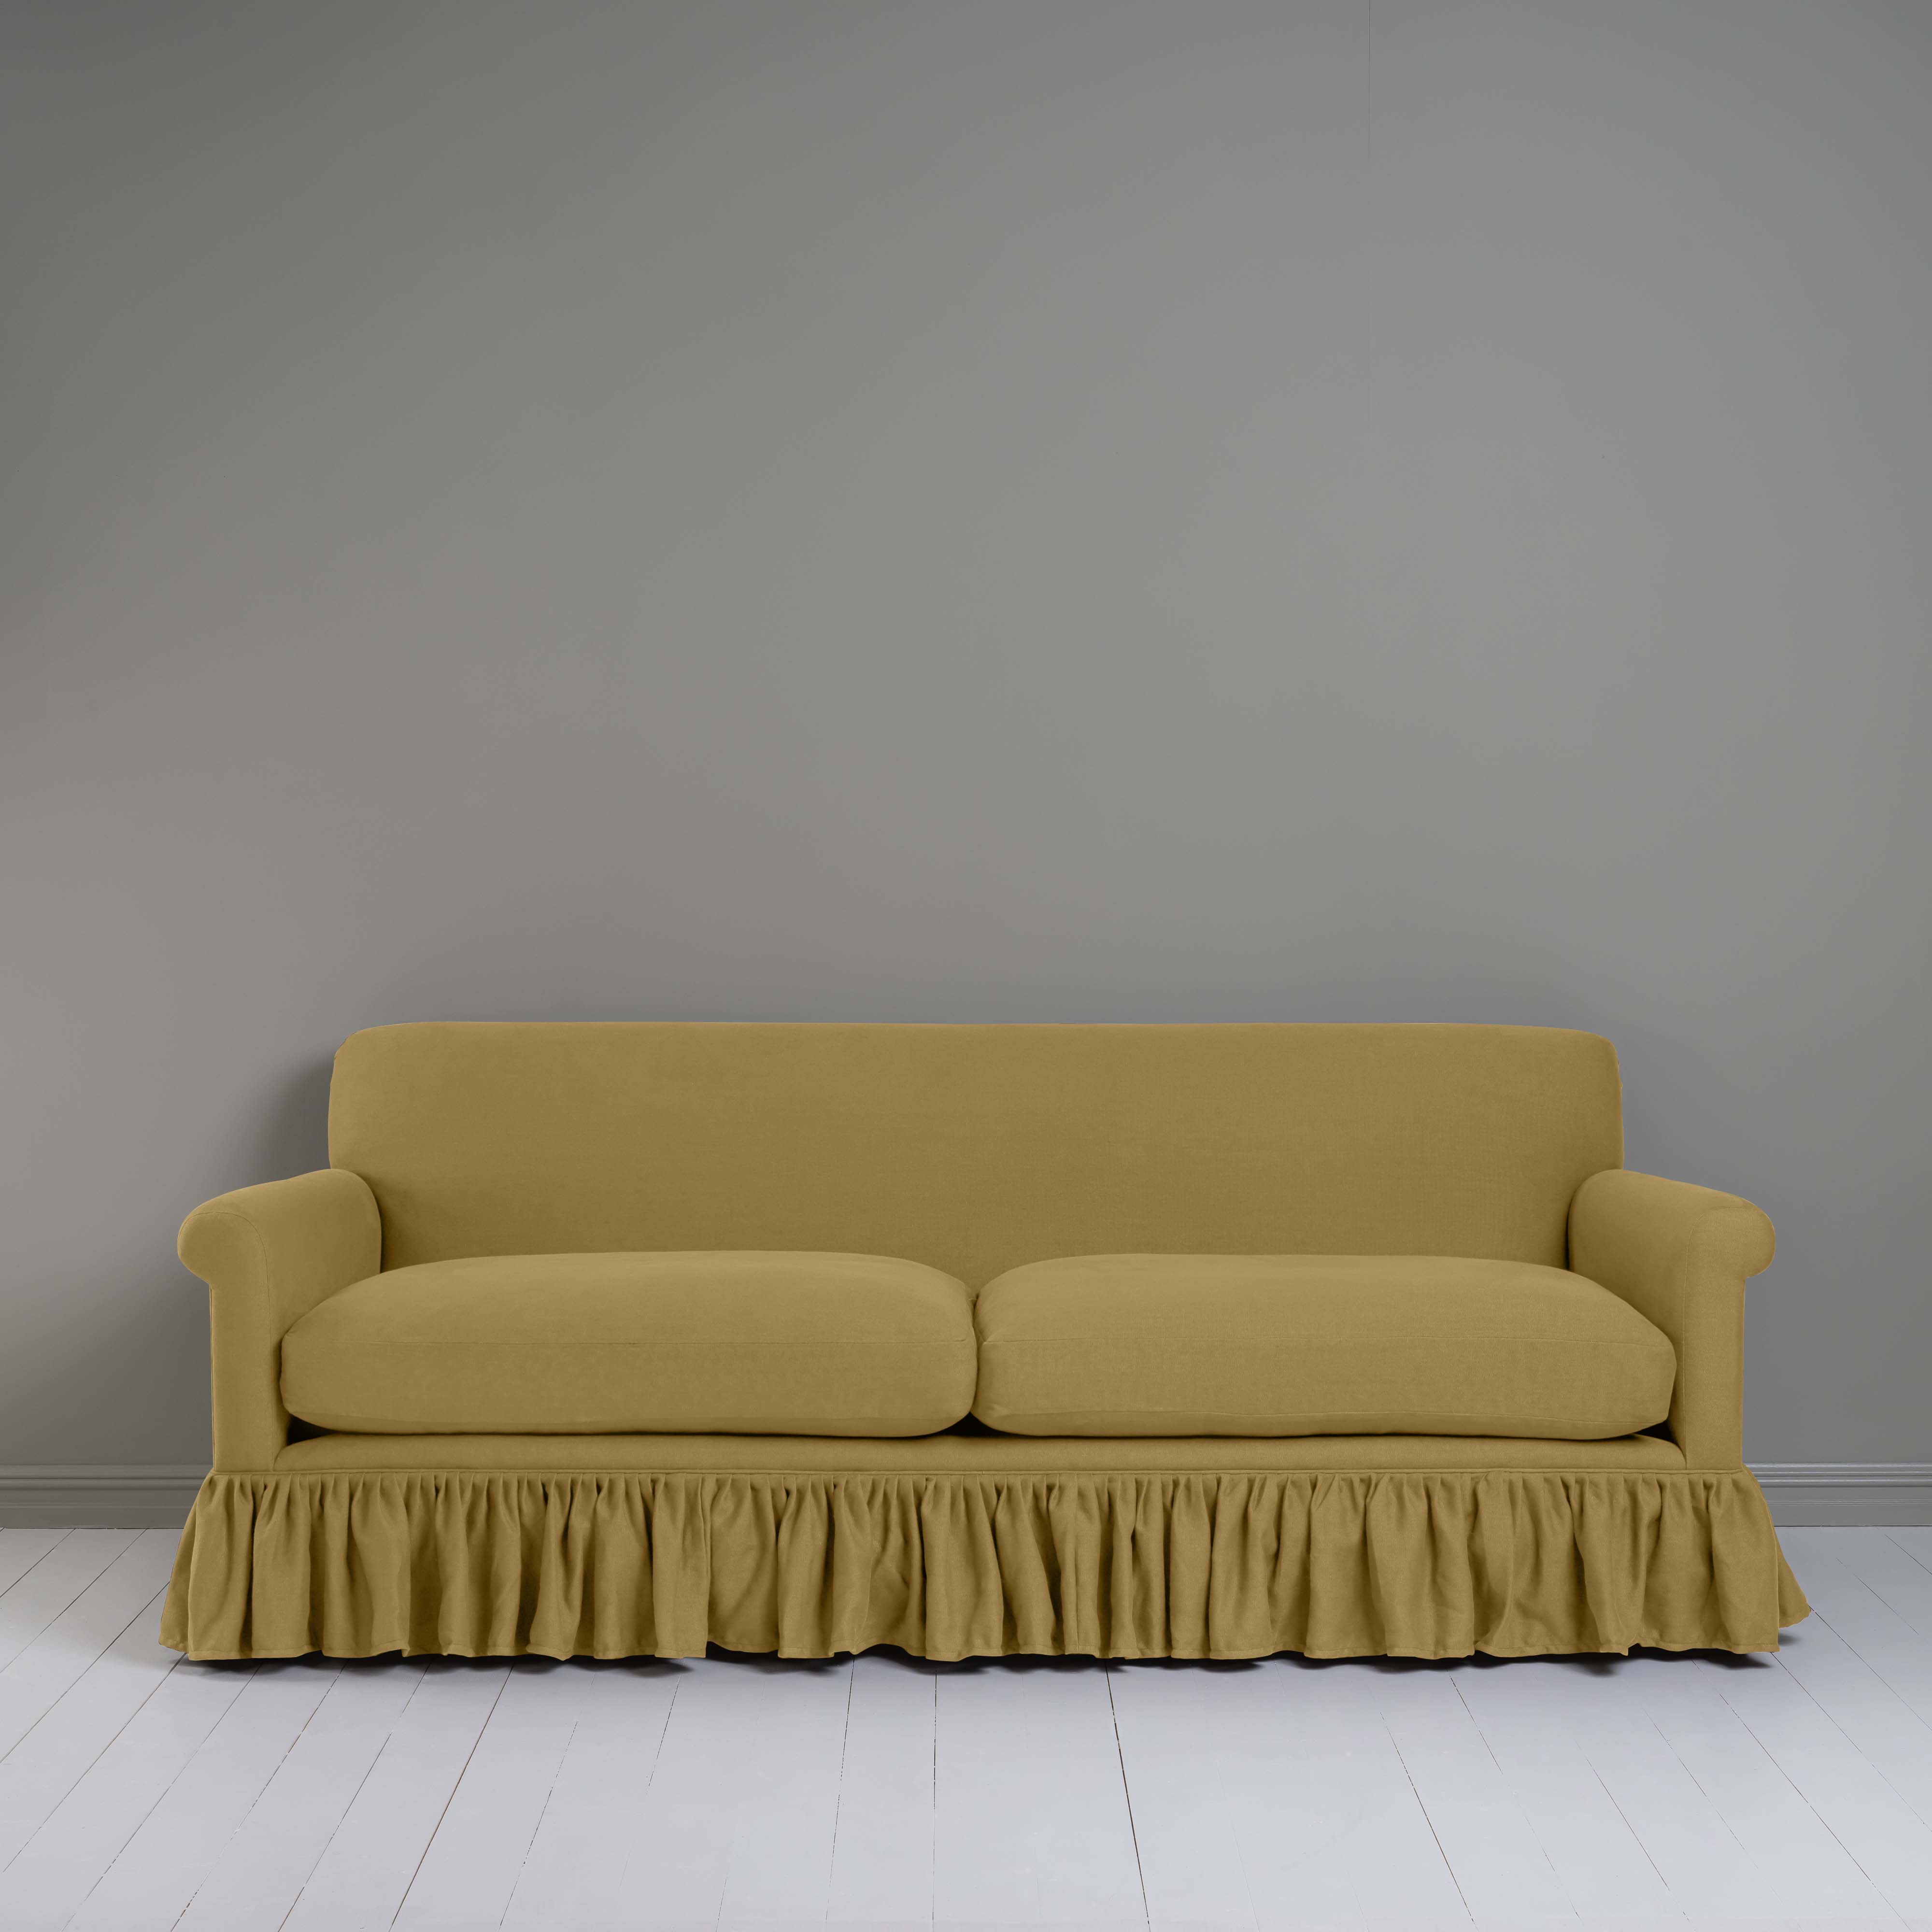  Curtain Call 4 Seater Sofa in Laidback Linen Ochre 